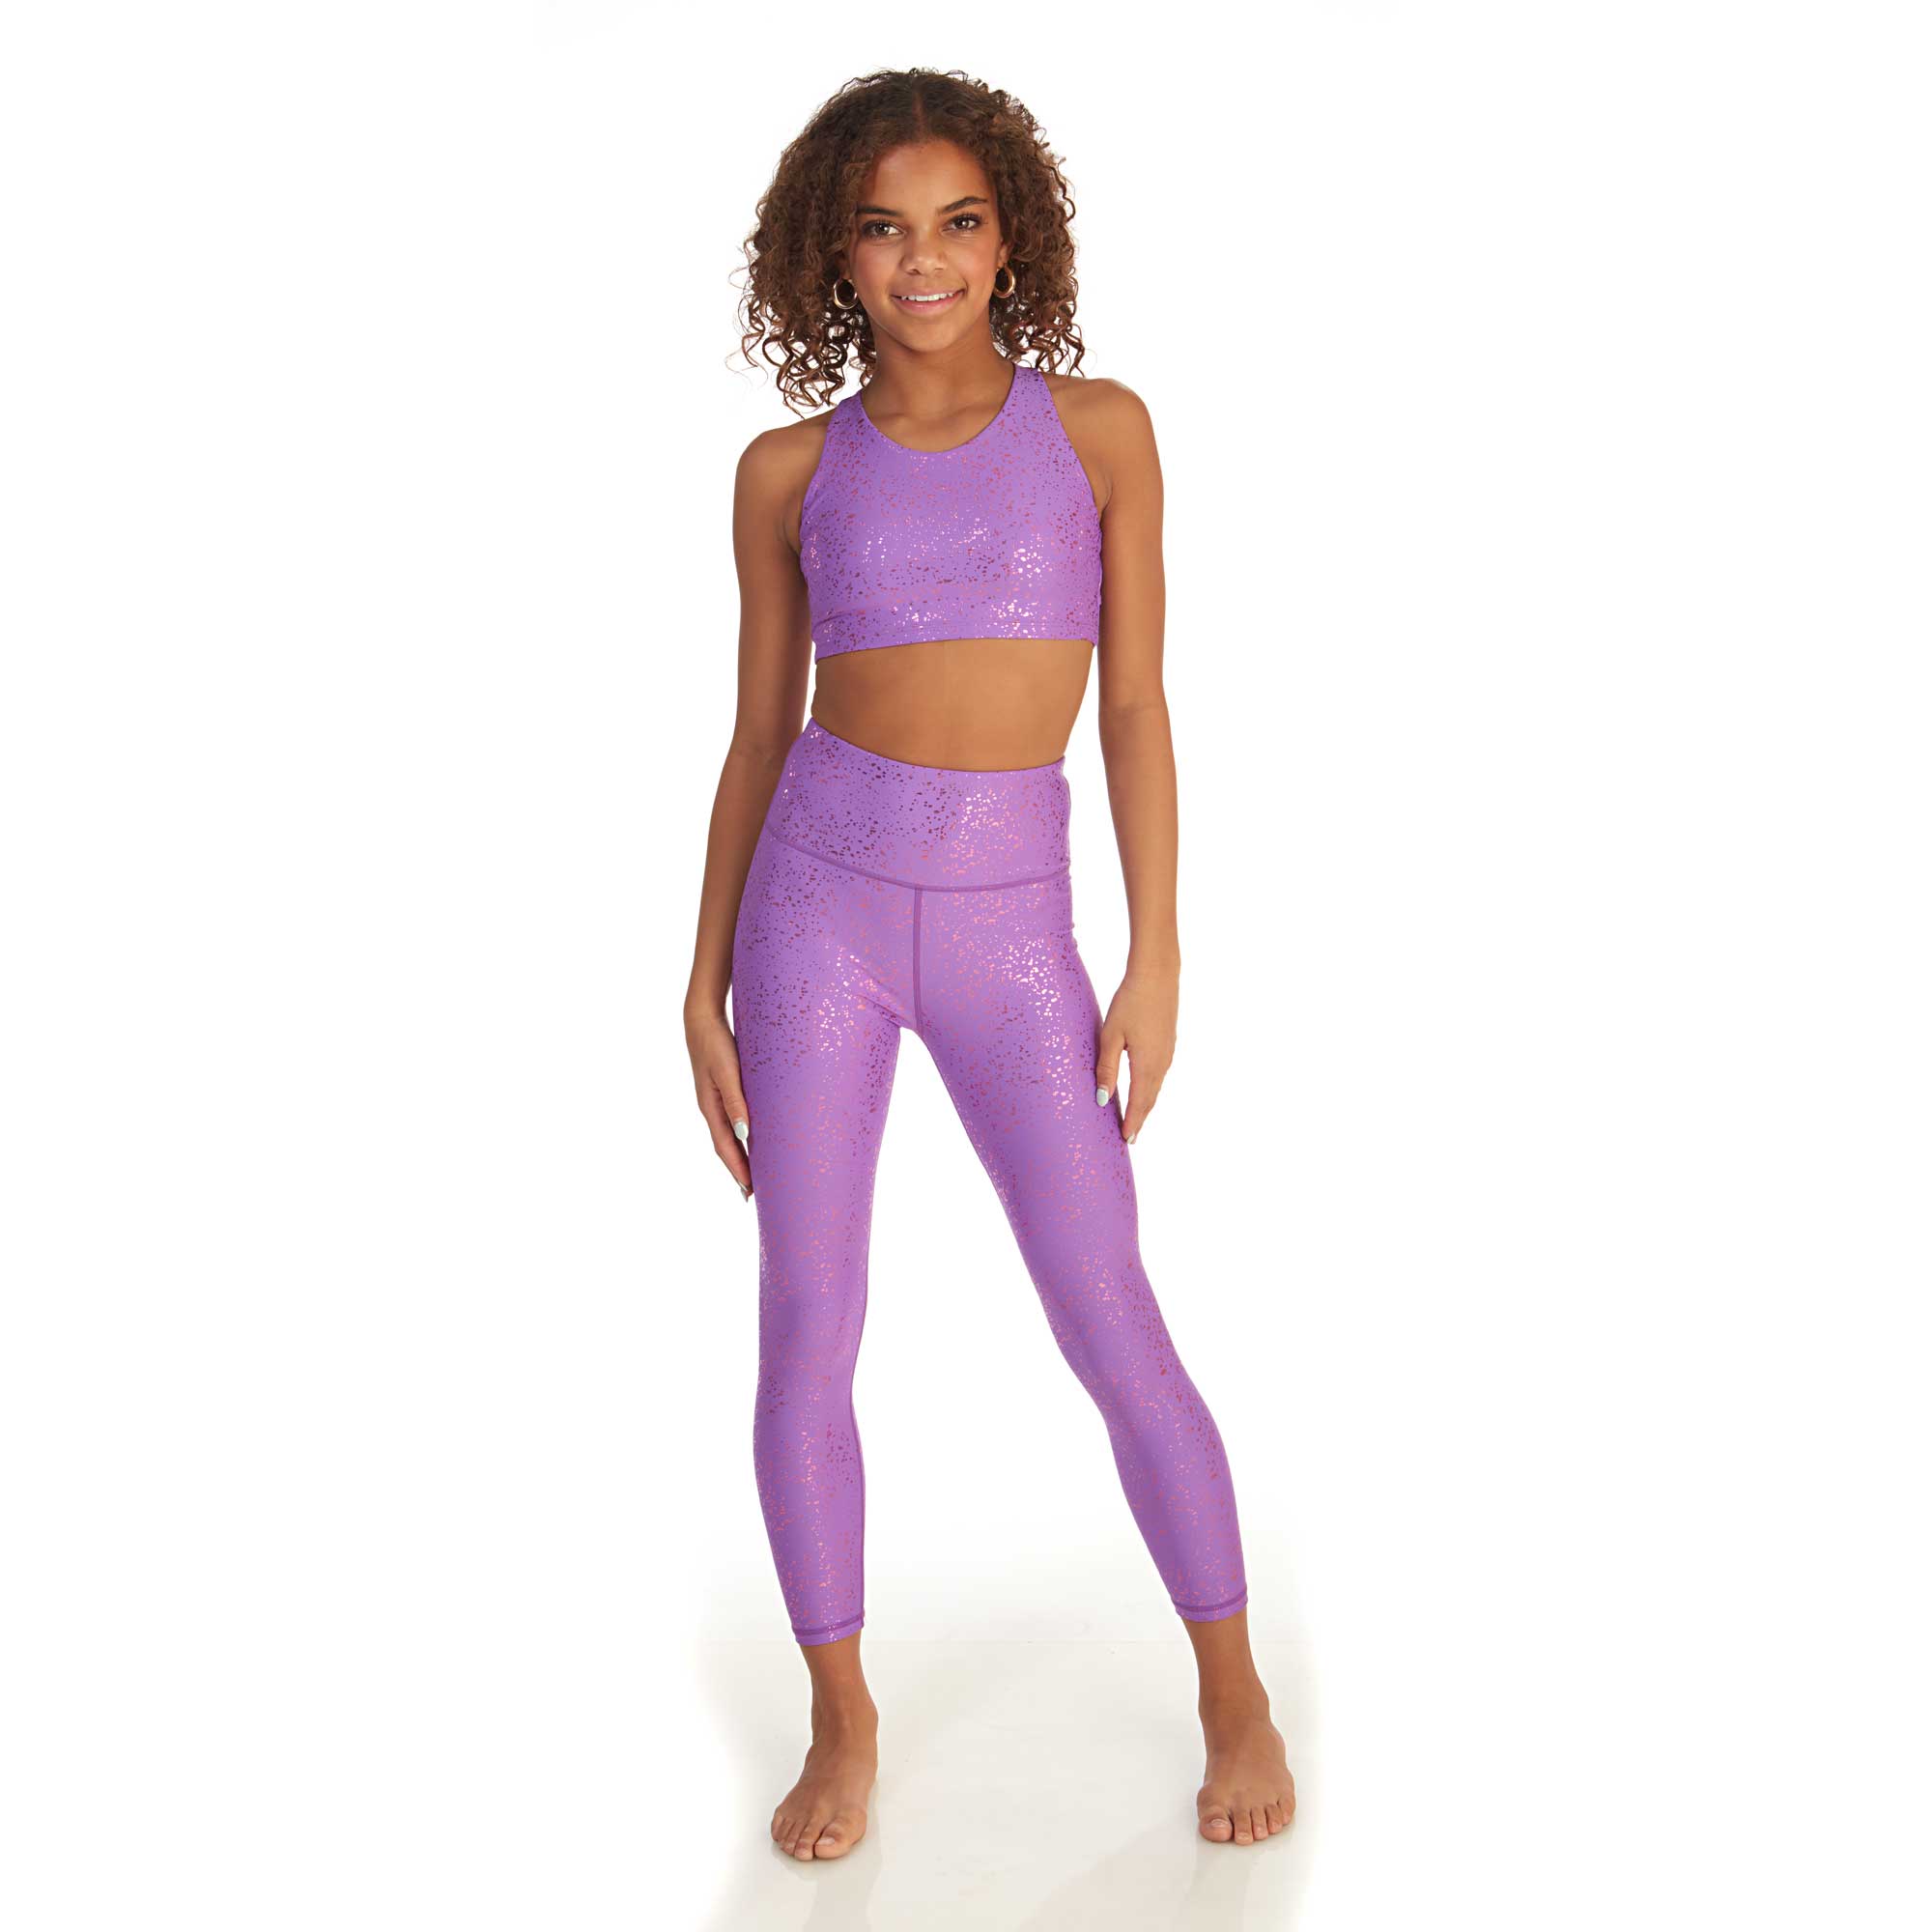 GIRLS HIGH-RISE ACTIVE LEGGINGS - STACEY | Limeapple